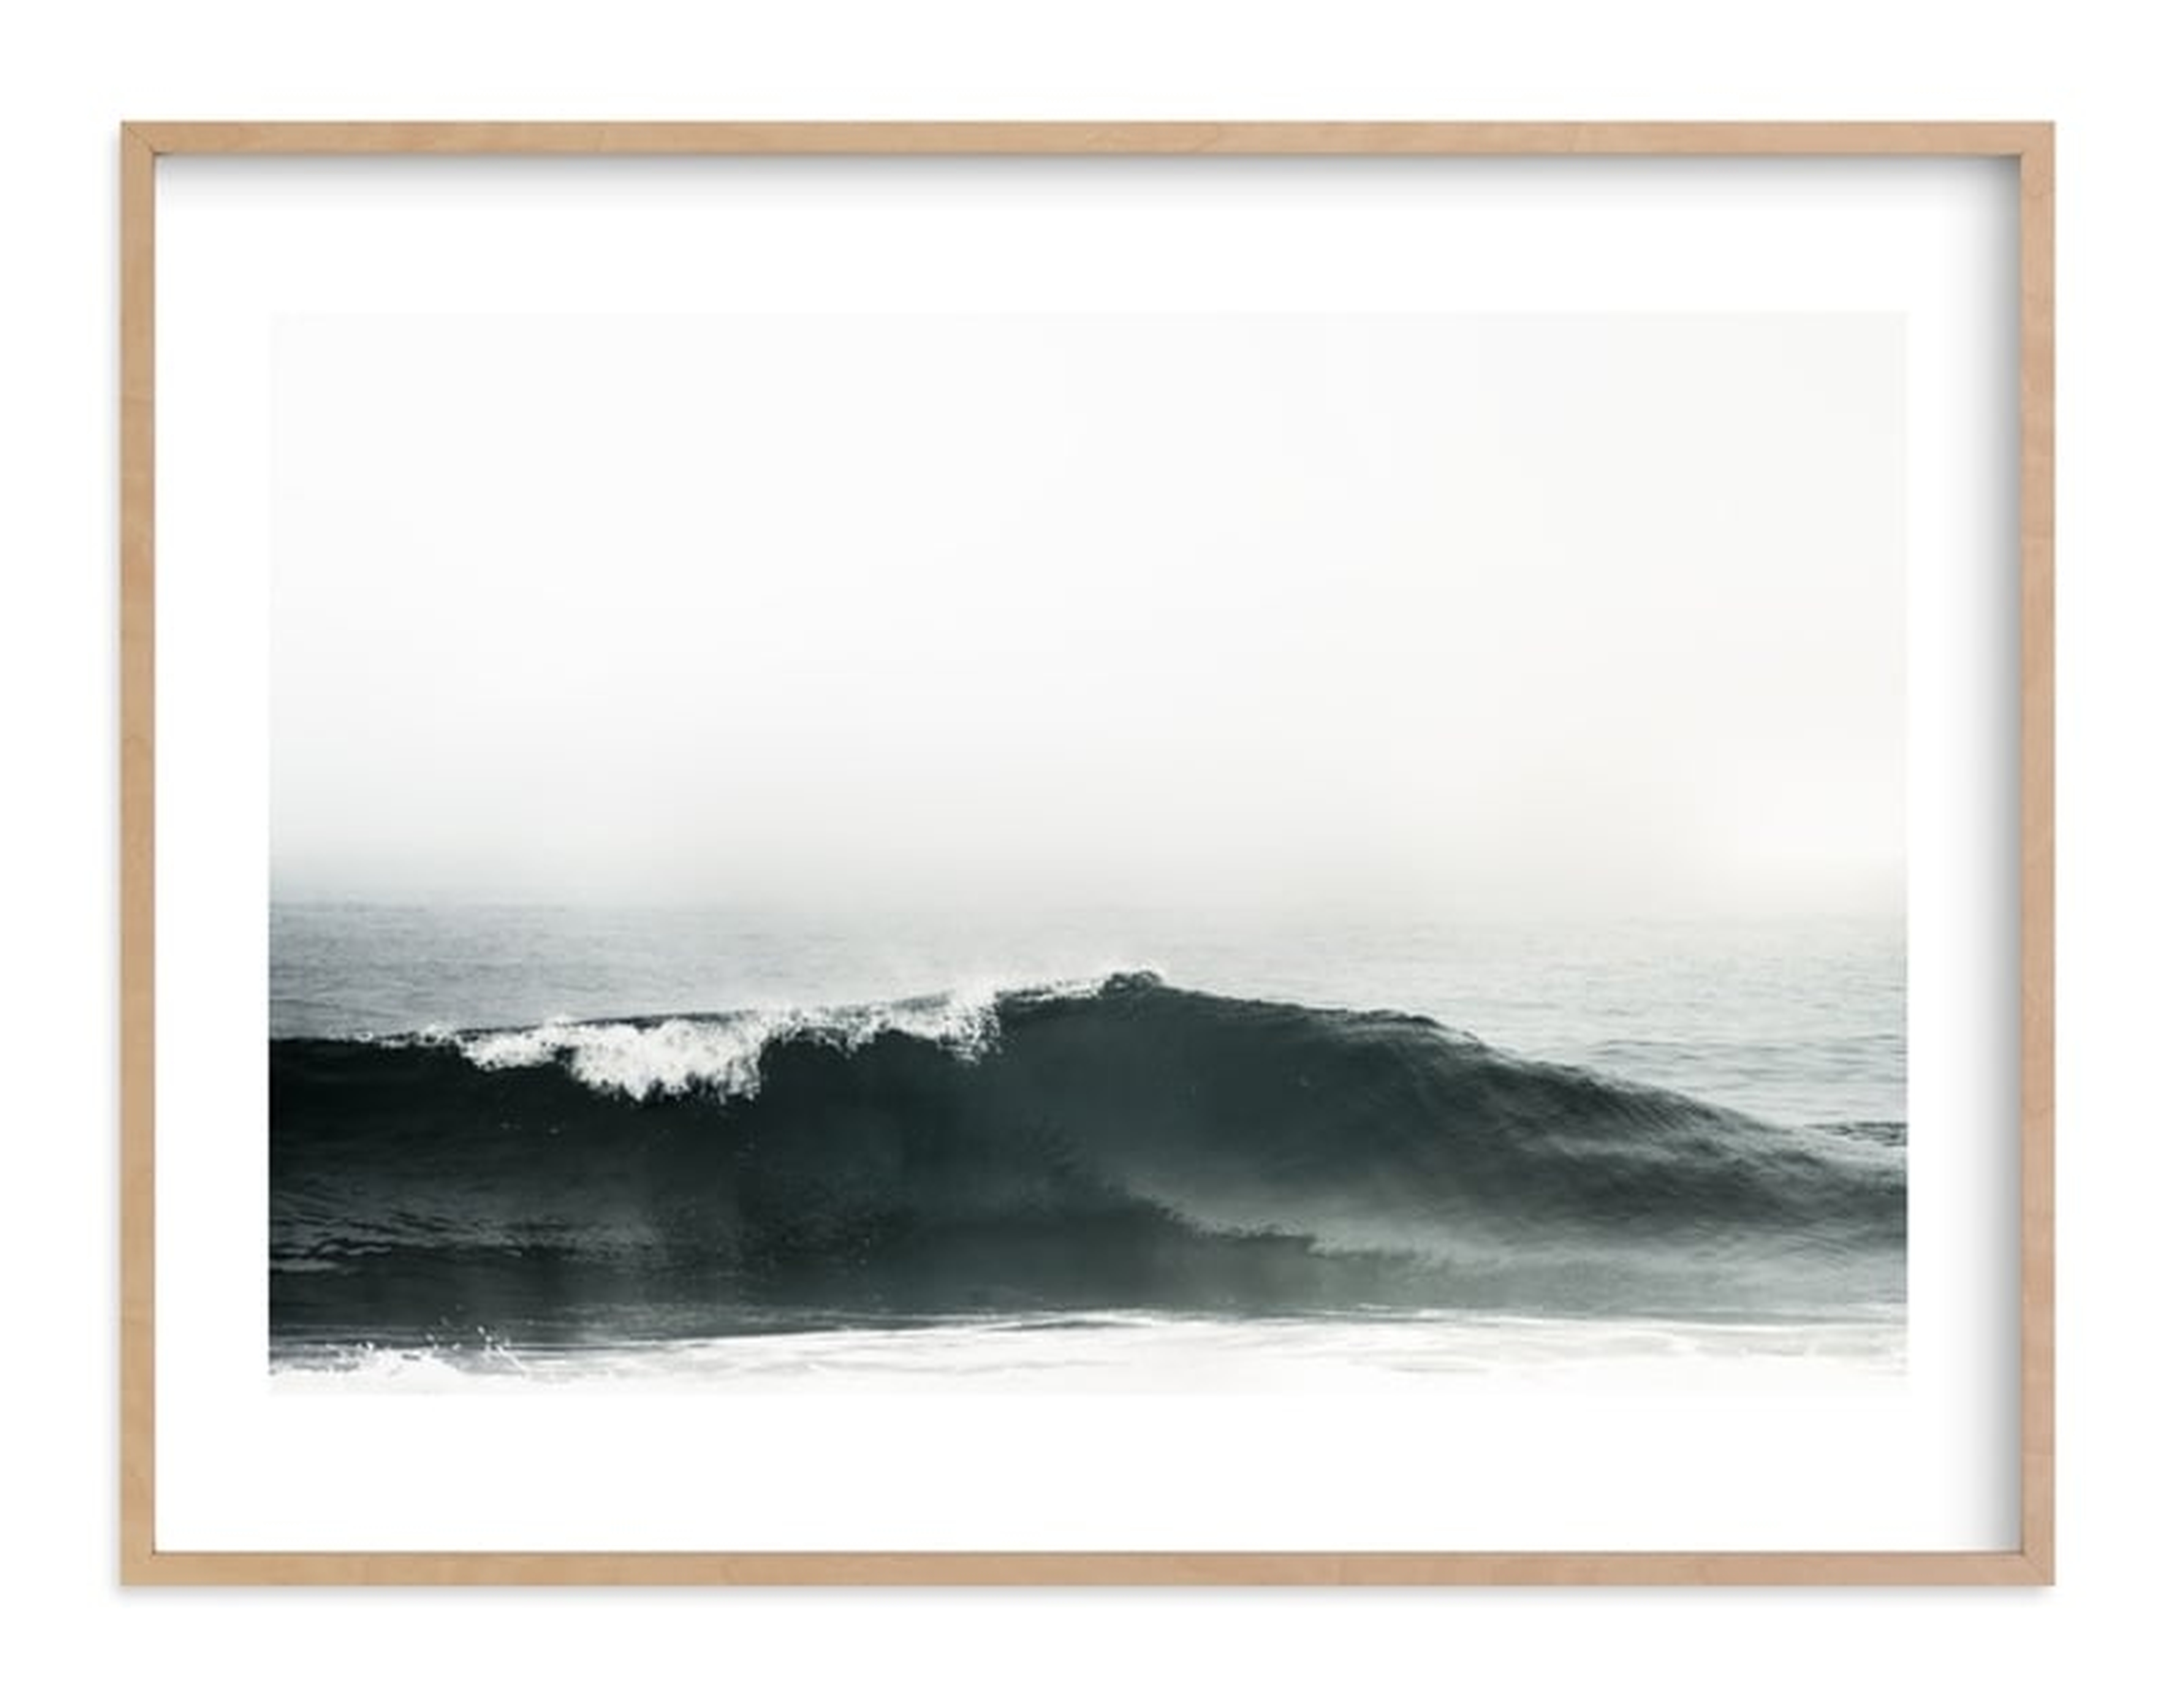 Mariner's Muse - 40"x30", Natural Raw Wood Frame, White Border - Minted